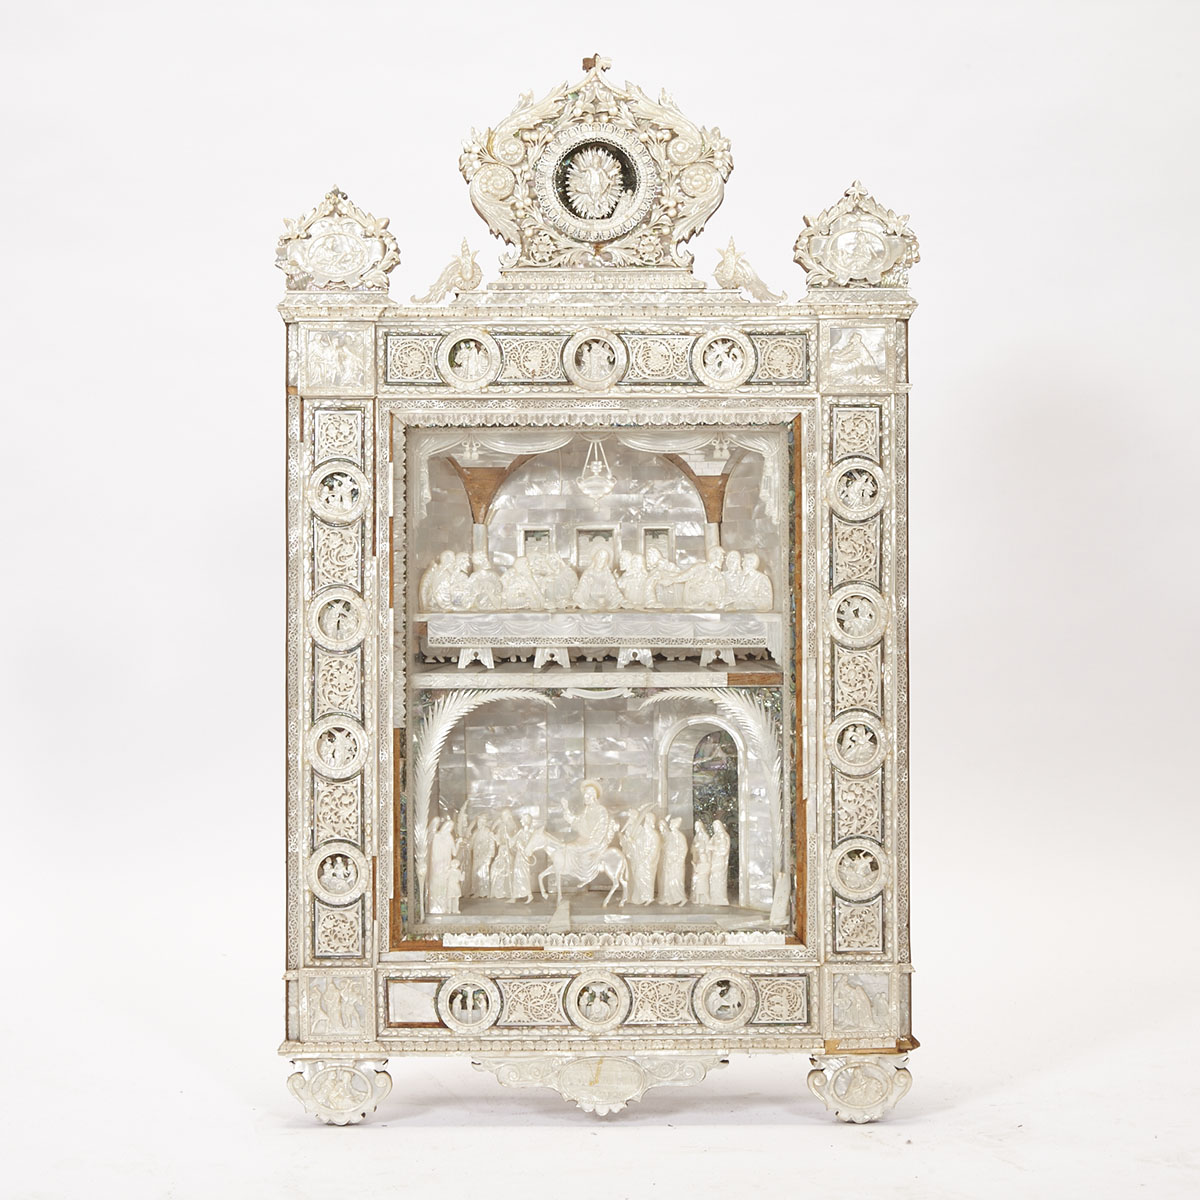 Large Mother of Pearl and Abalone Mounted Diorama Icon, Jerusalem, 19th early 20th century